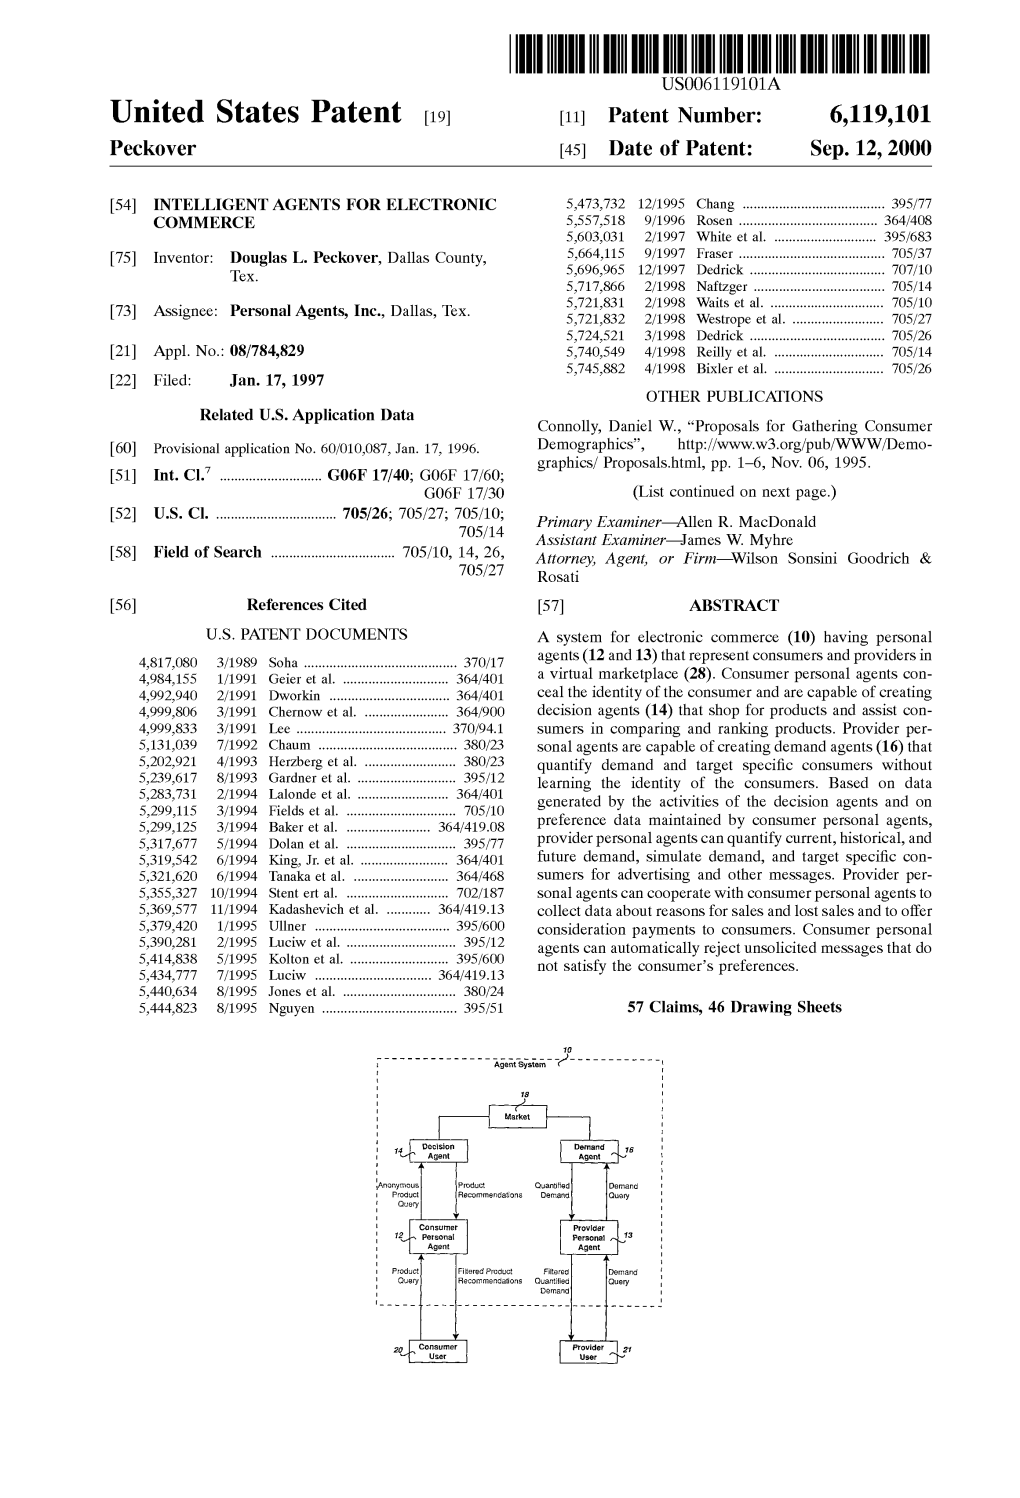 United States Patent (19) 11 Patent Number: 6,119,101 Peckover (45) Date of Patent: Sep